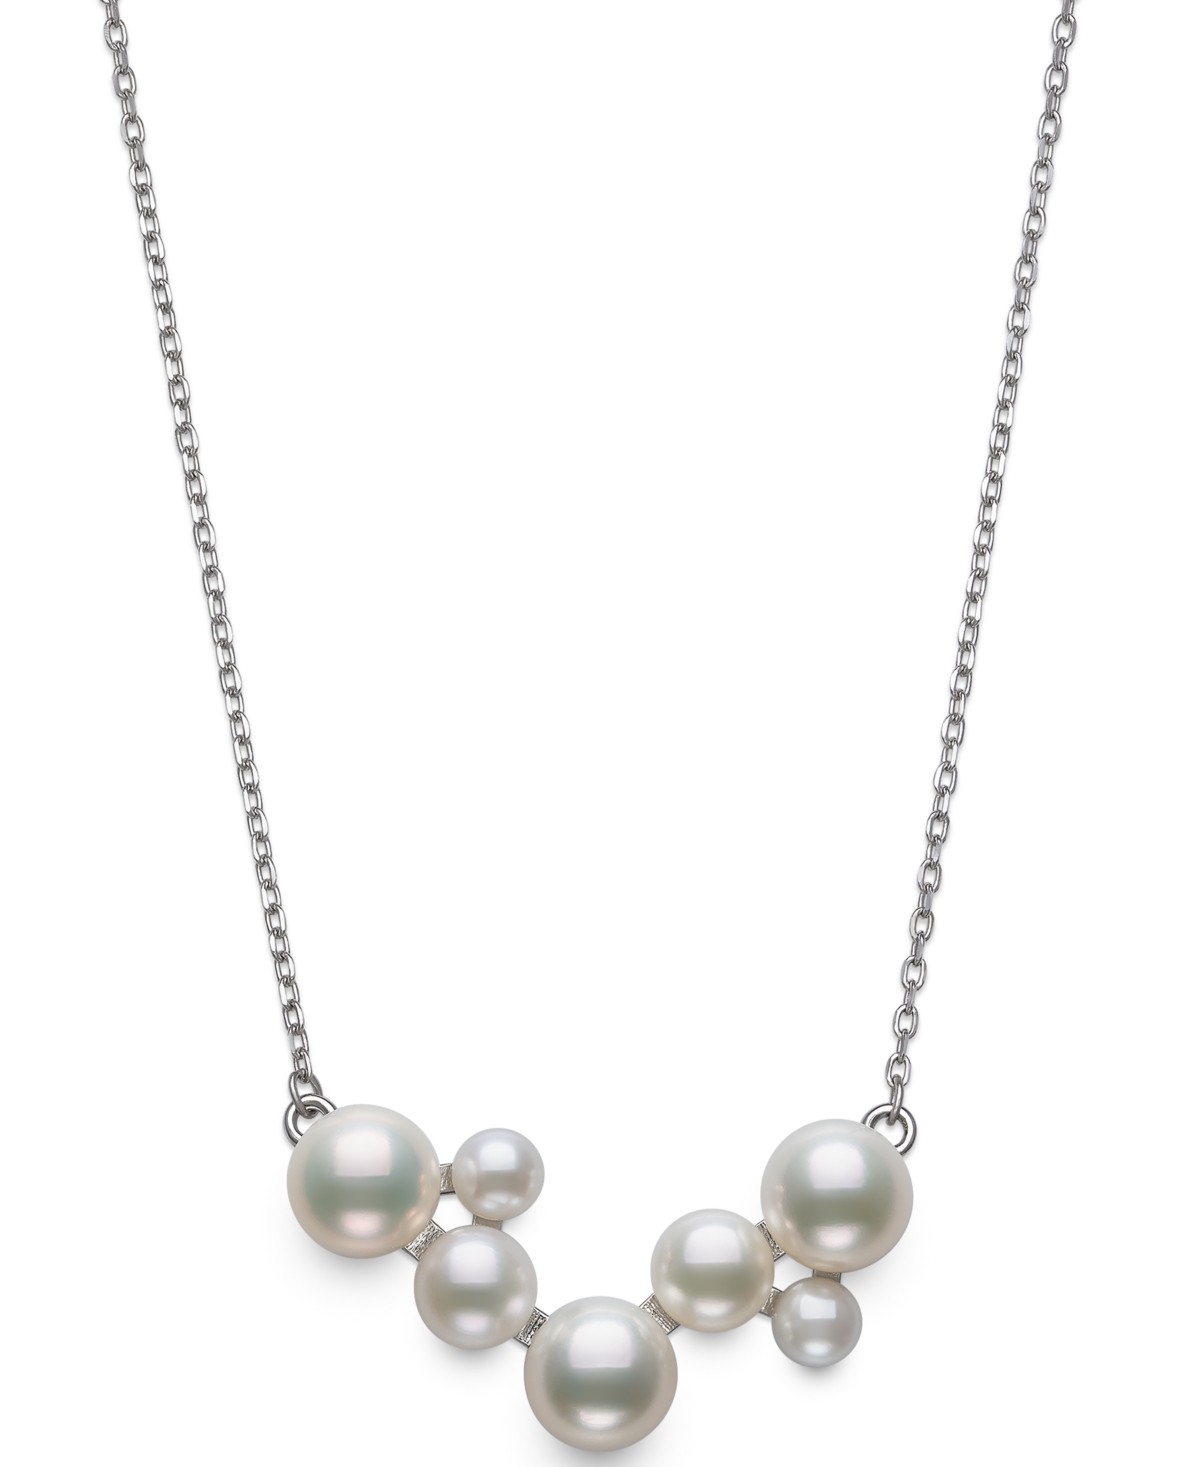 Cultured Freshwater Button Pearl (4-8mm) Cluster Collar Necklace in Sterling Silver, 16" + 2" extender, Created for Macy's - Sterling Sil